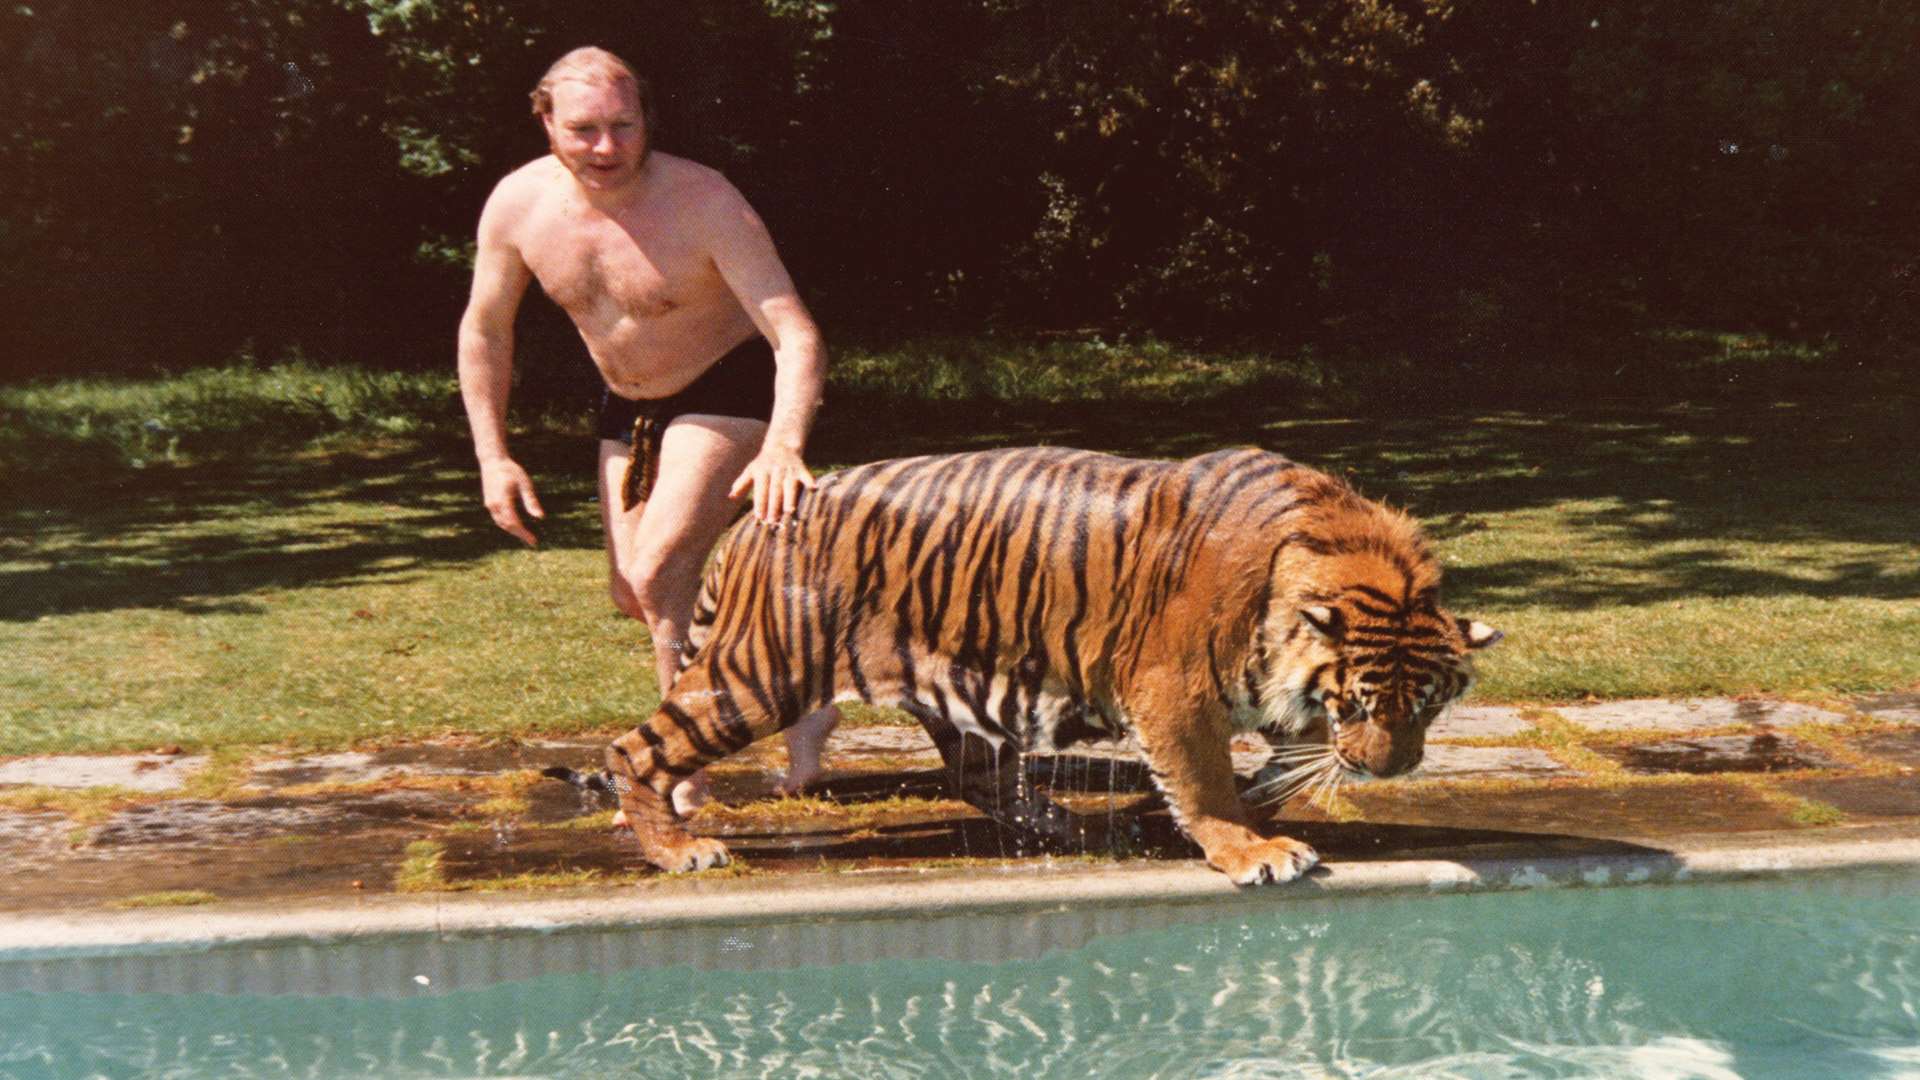 John Aspinall with one of his tigers in the late 1970s